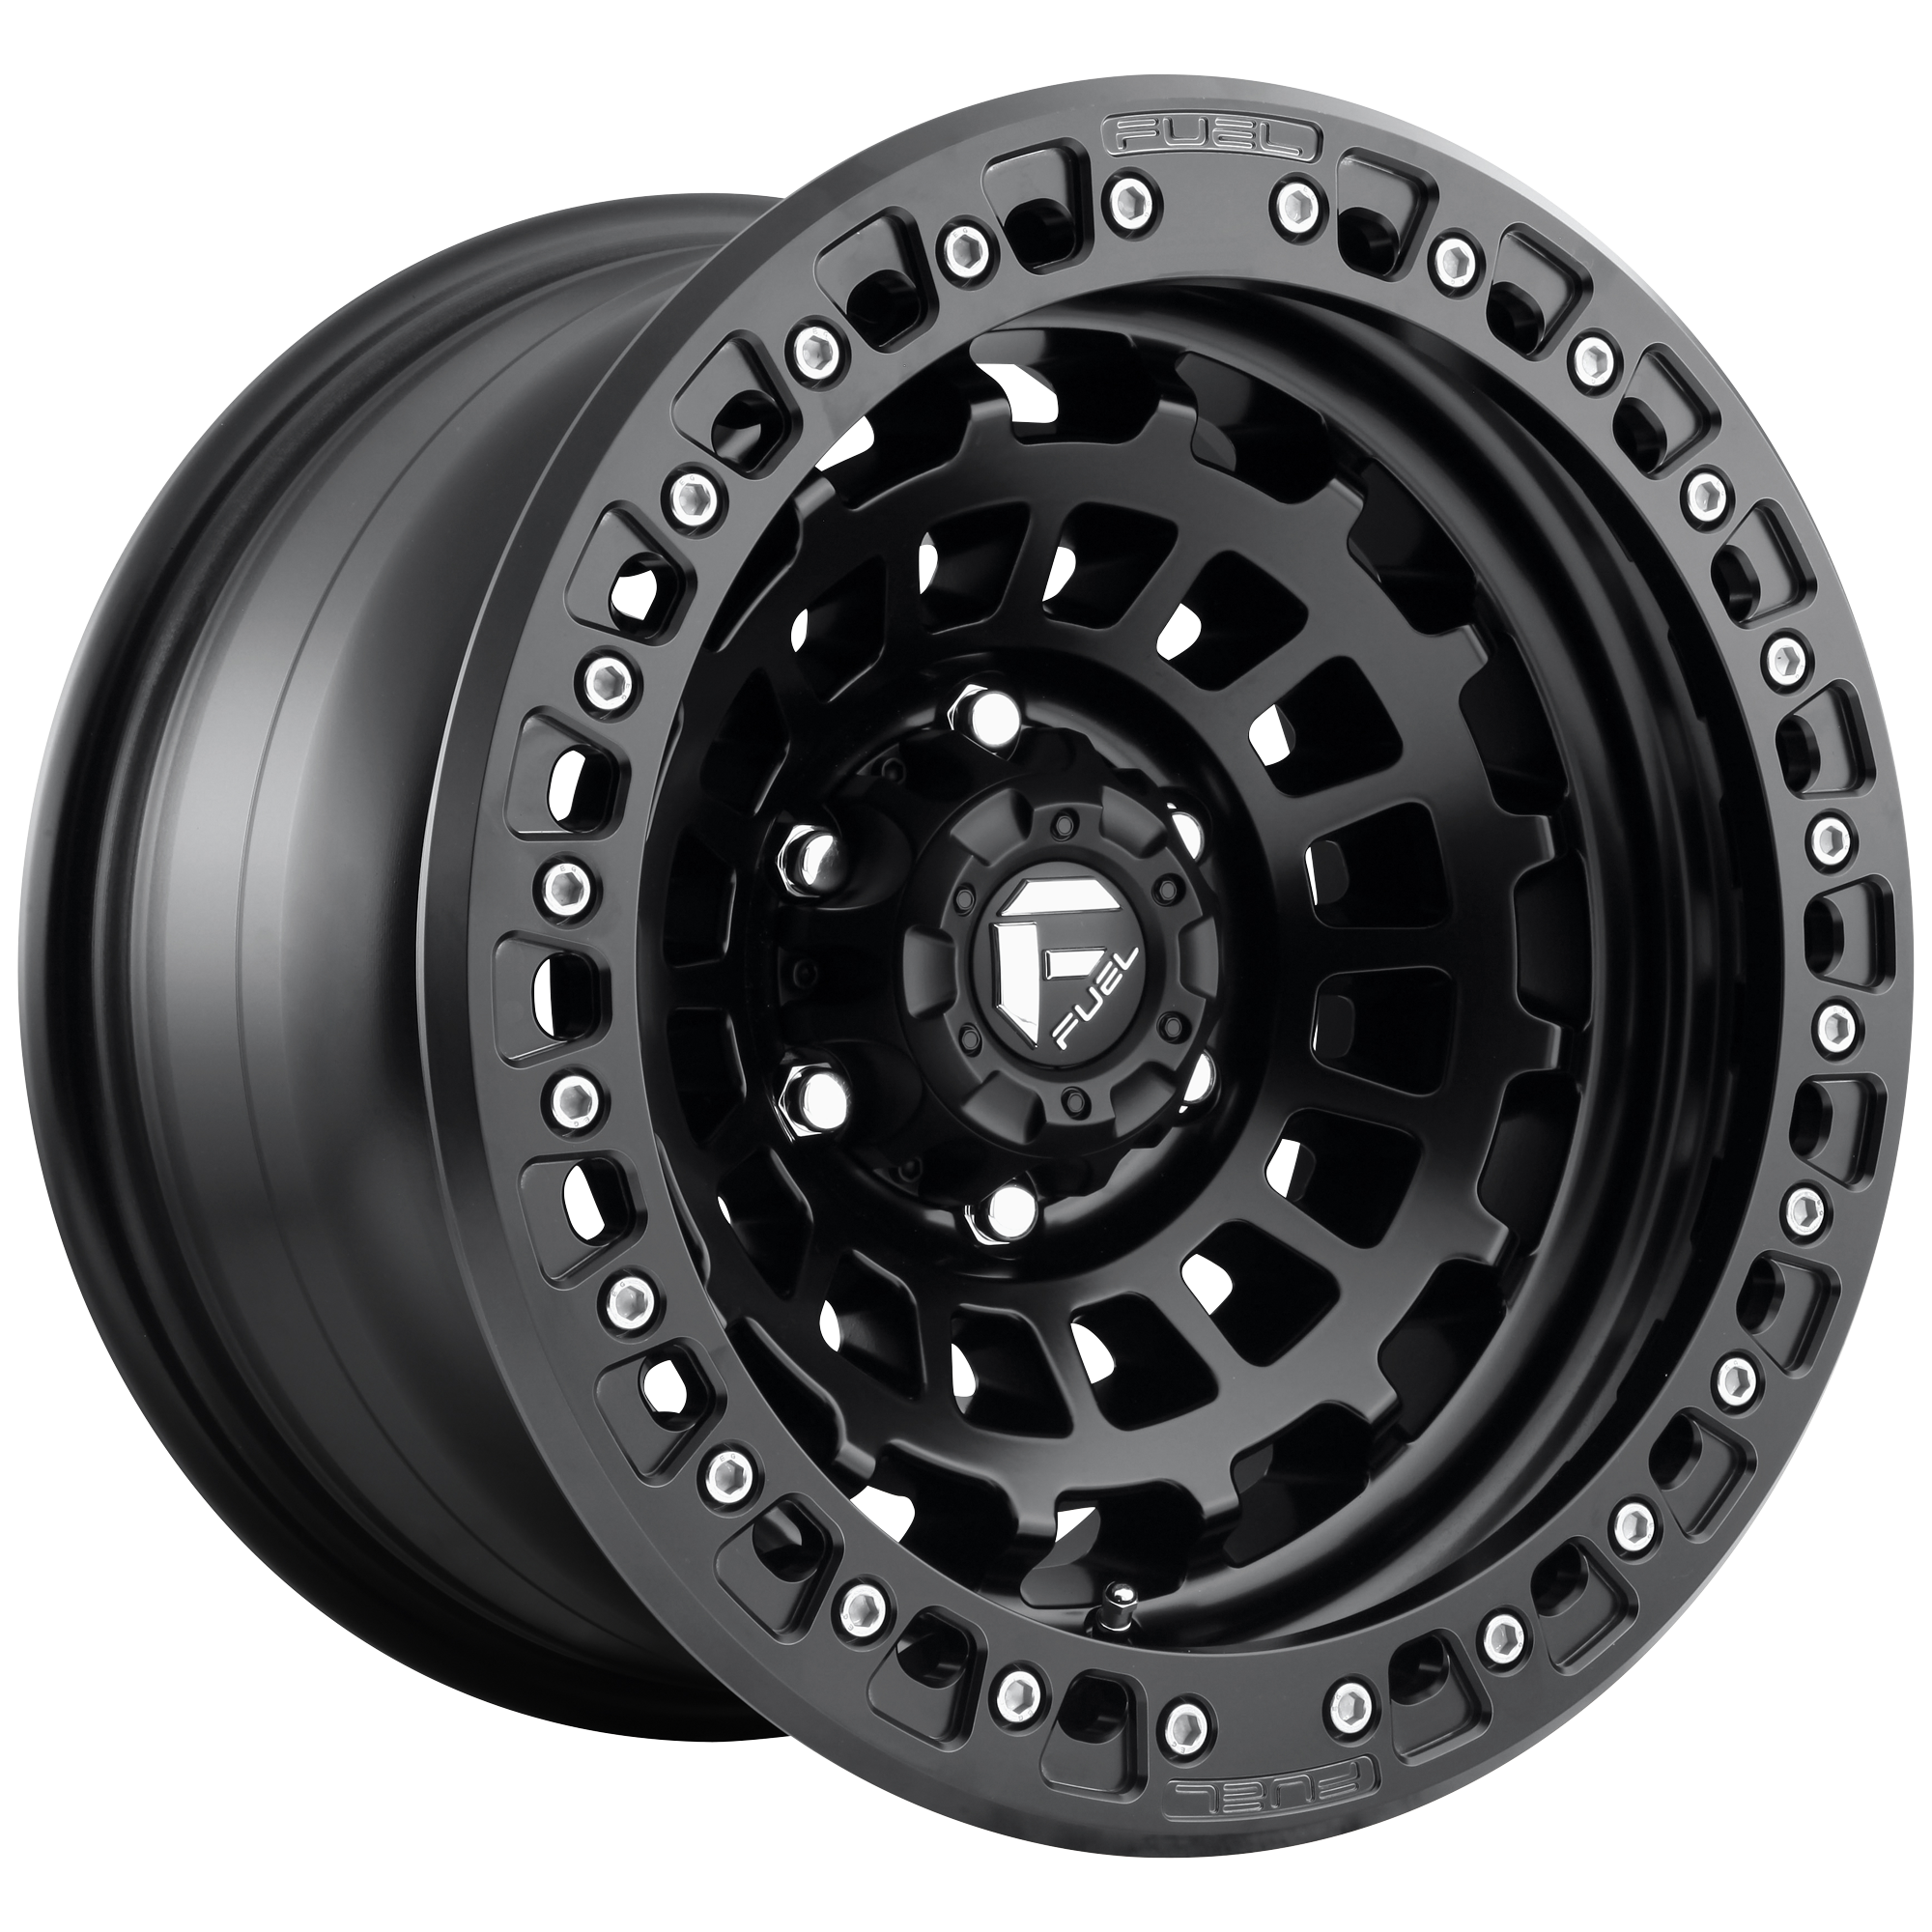 ZEPHYR BL - OFF ROAD ONLY 17x9 5x127.00 MATTE BLACK (-15 mm) - Tires and Engine Performance